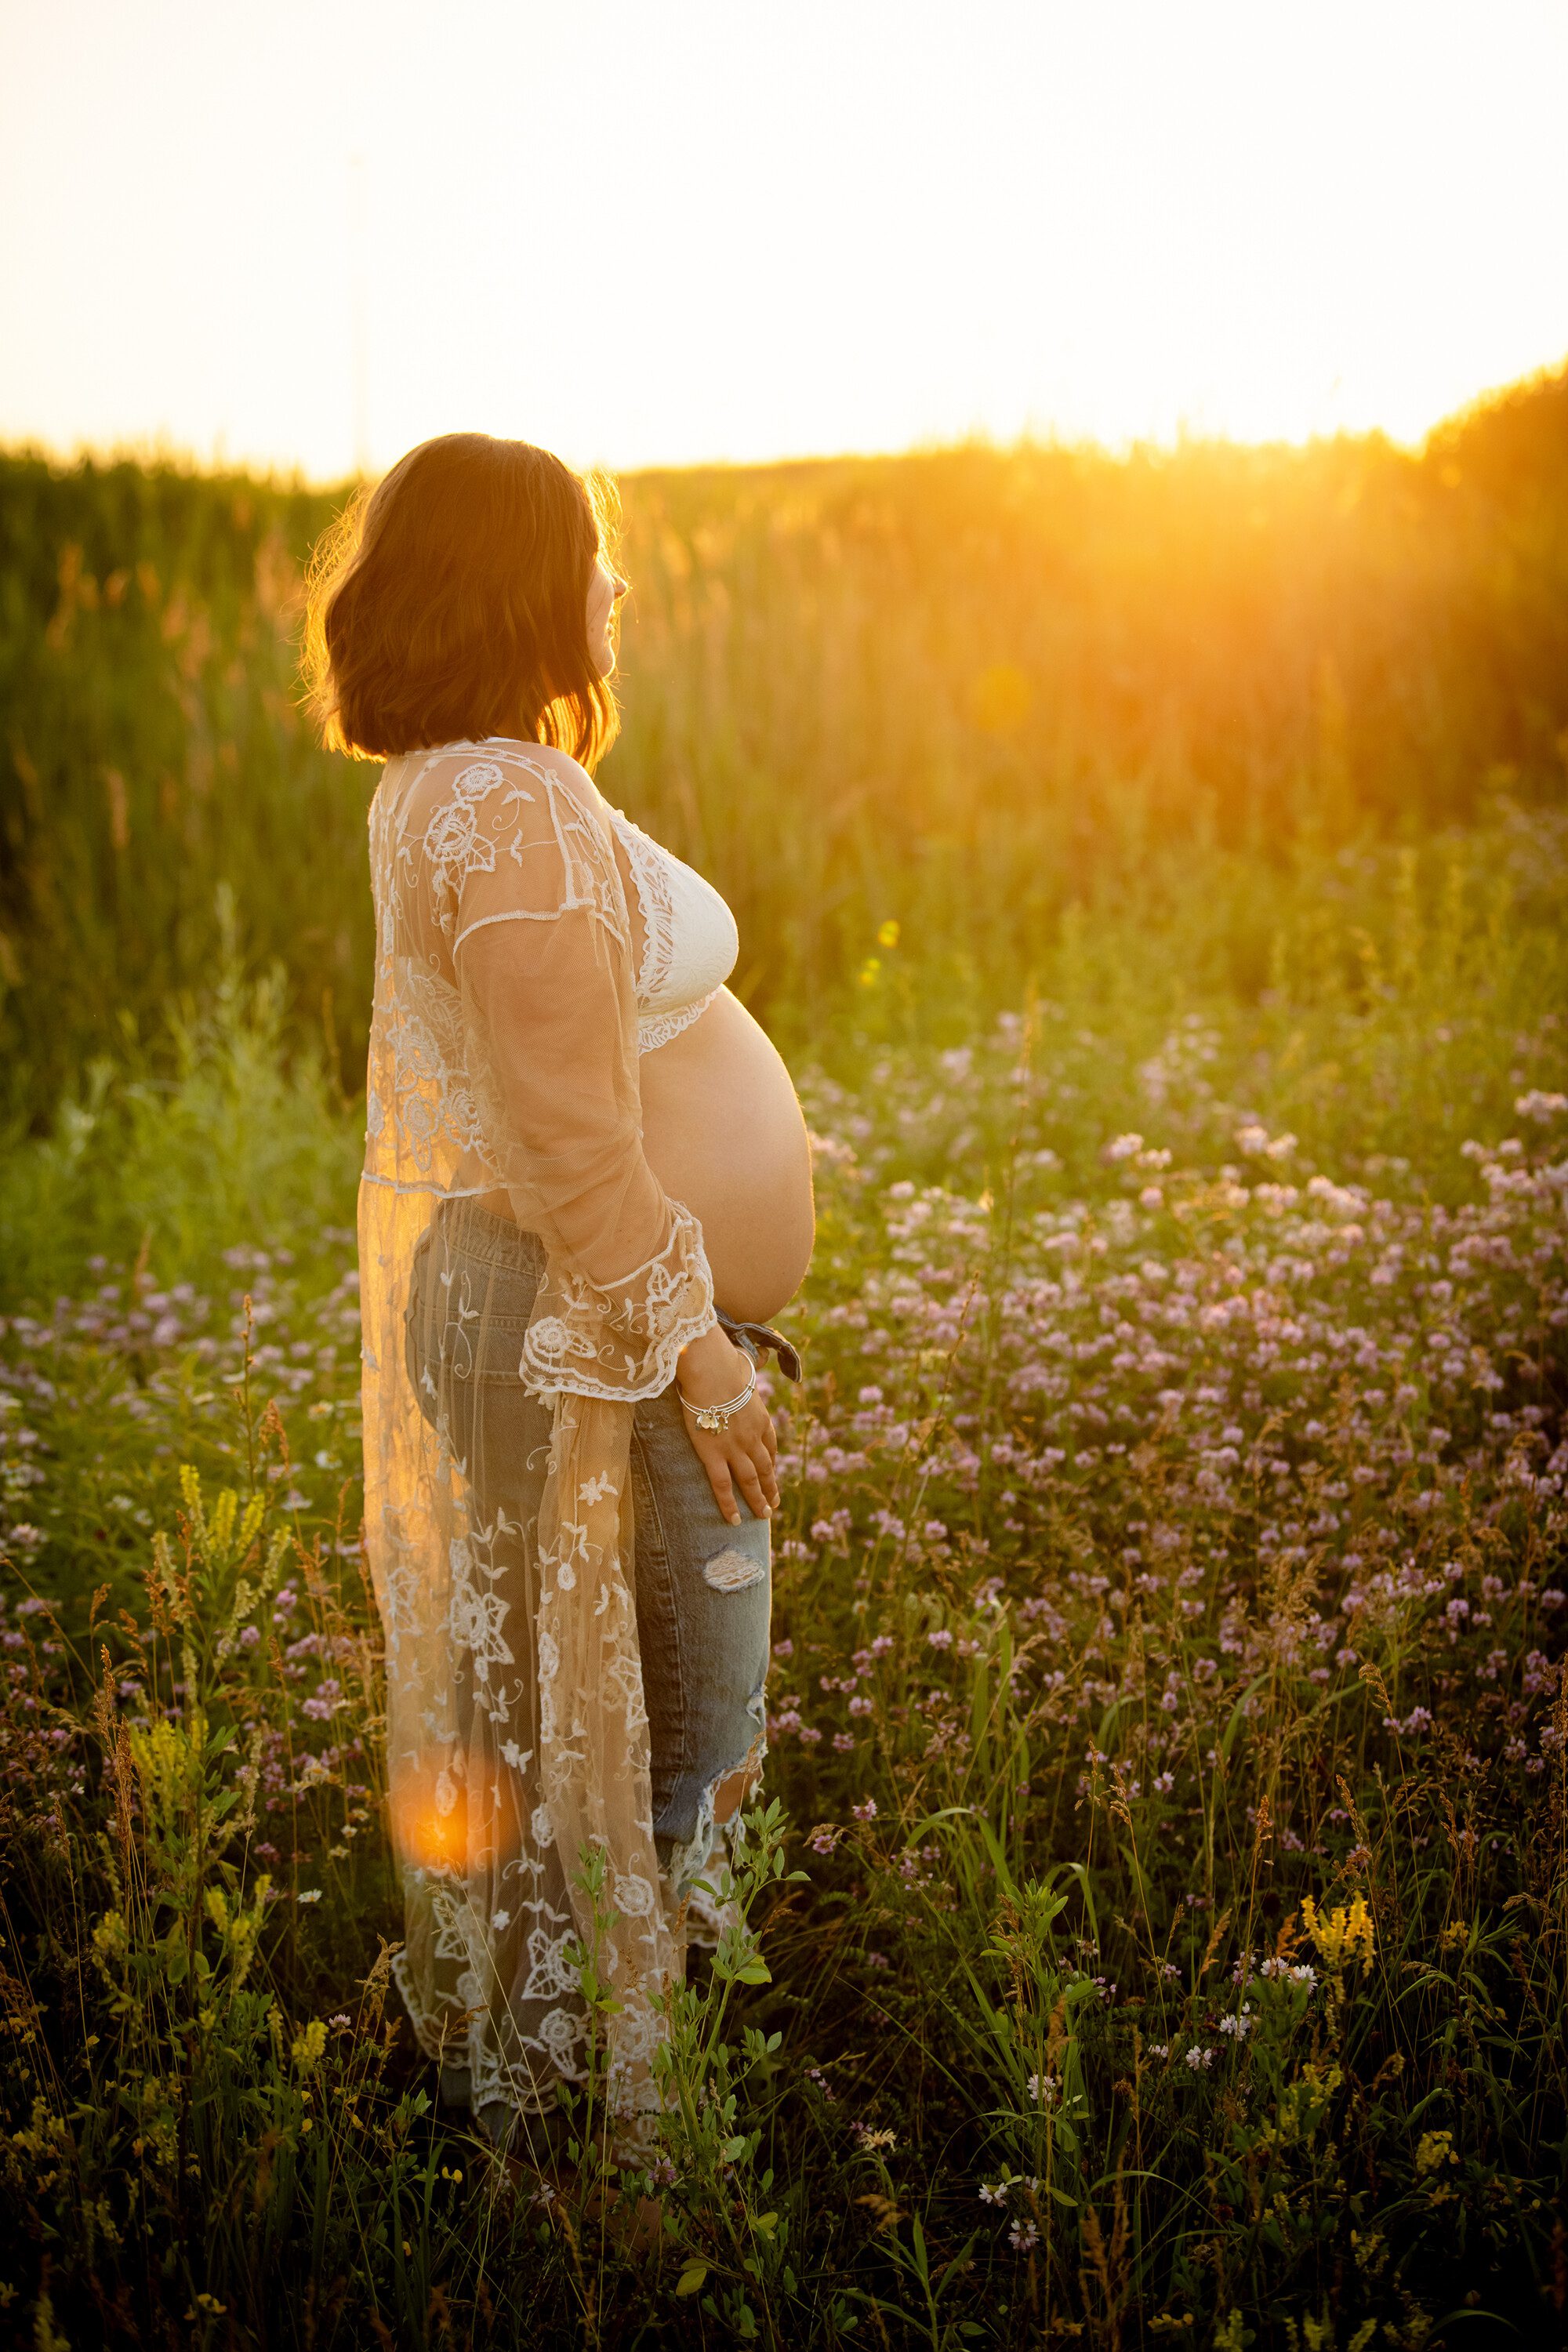 milwaukee maternity photographers. a pregnant women standing in a field of tall grass and wildflowers is looking in the distance with the golden sun setting behind her. she has on a white bra, with lace cover up exposing her pregnant belly.